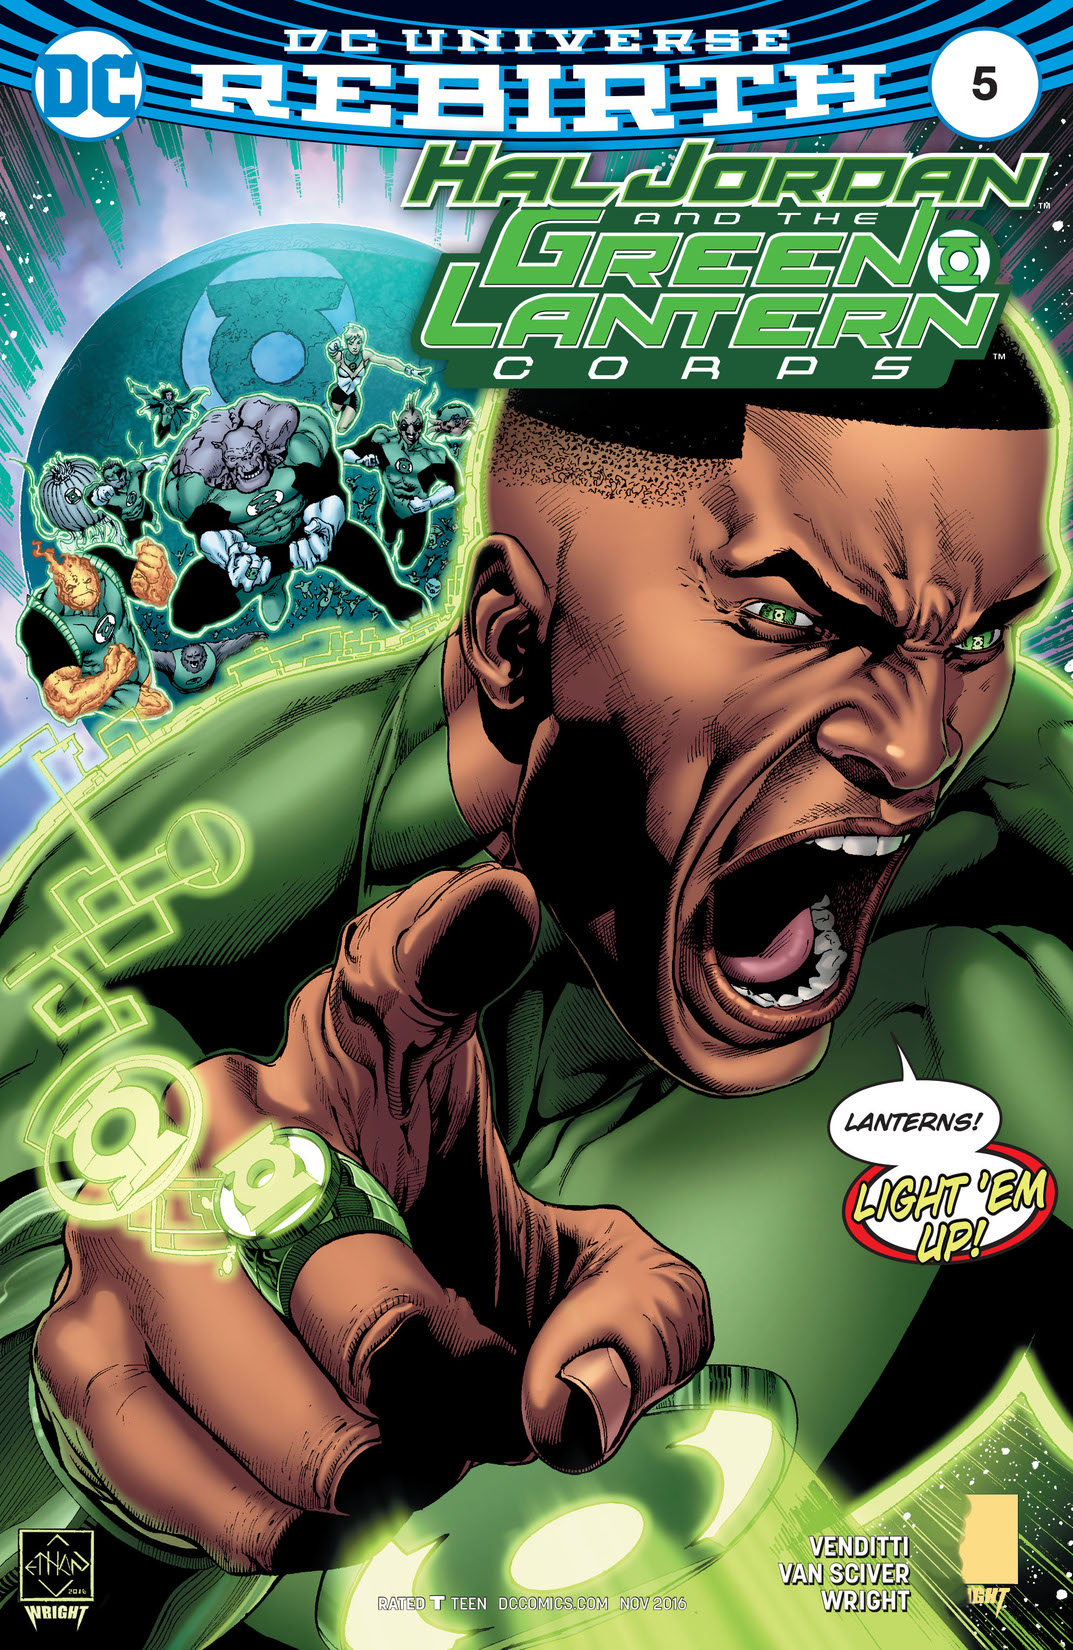 Hal Jordan and The Green Lantern Corps #5 preview images